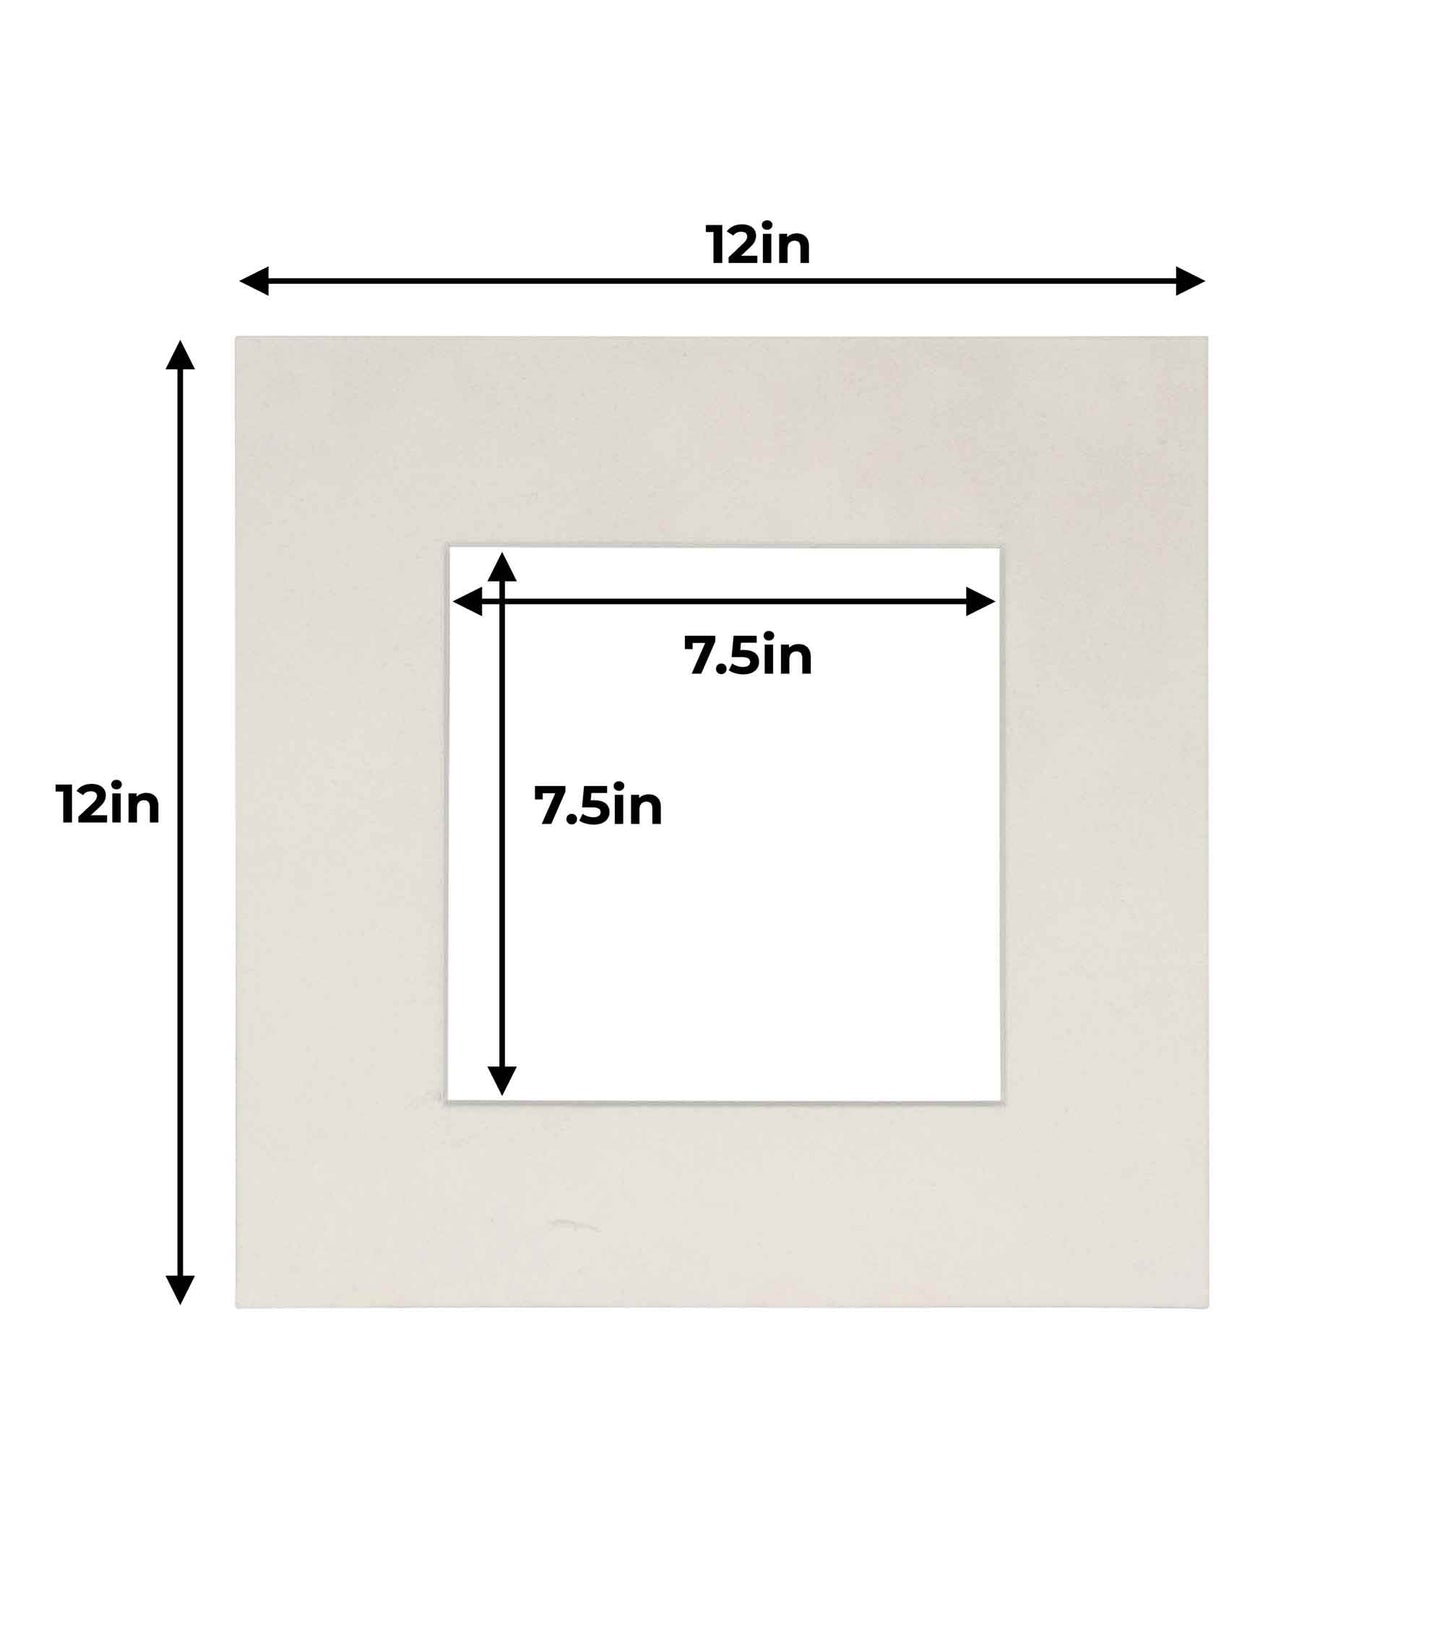 Pack of 25 White Suede Precut Acid-Free Matboard Set with Clear Bags & Backings